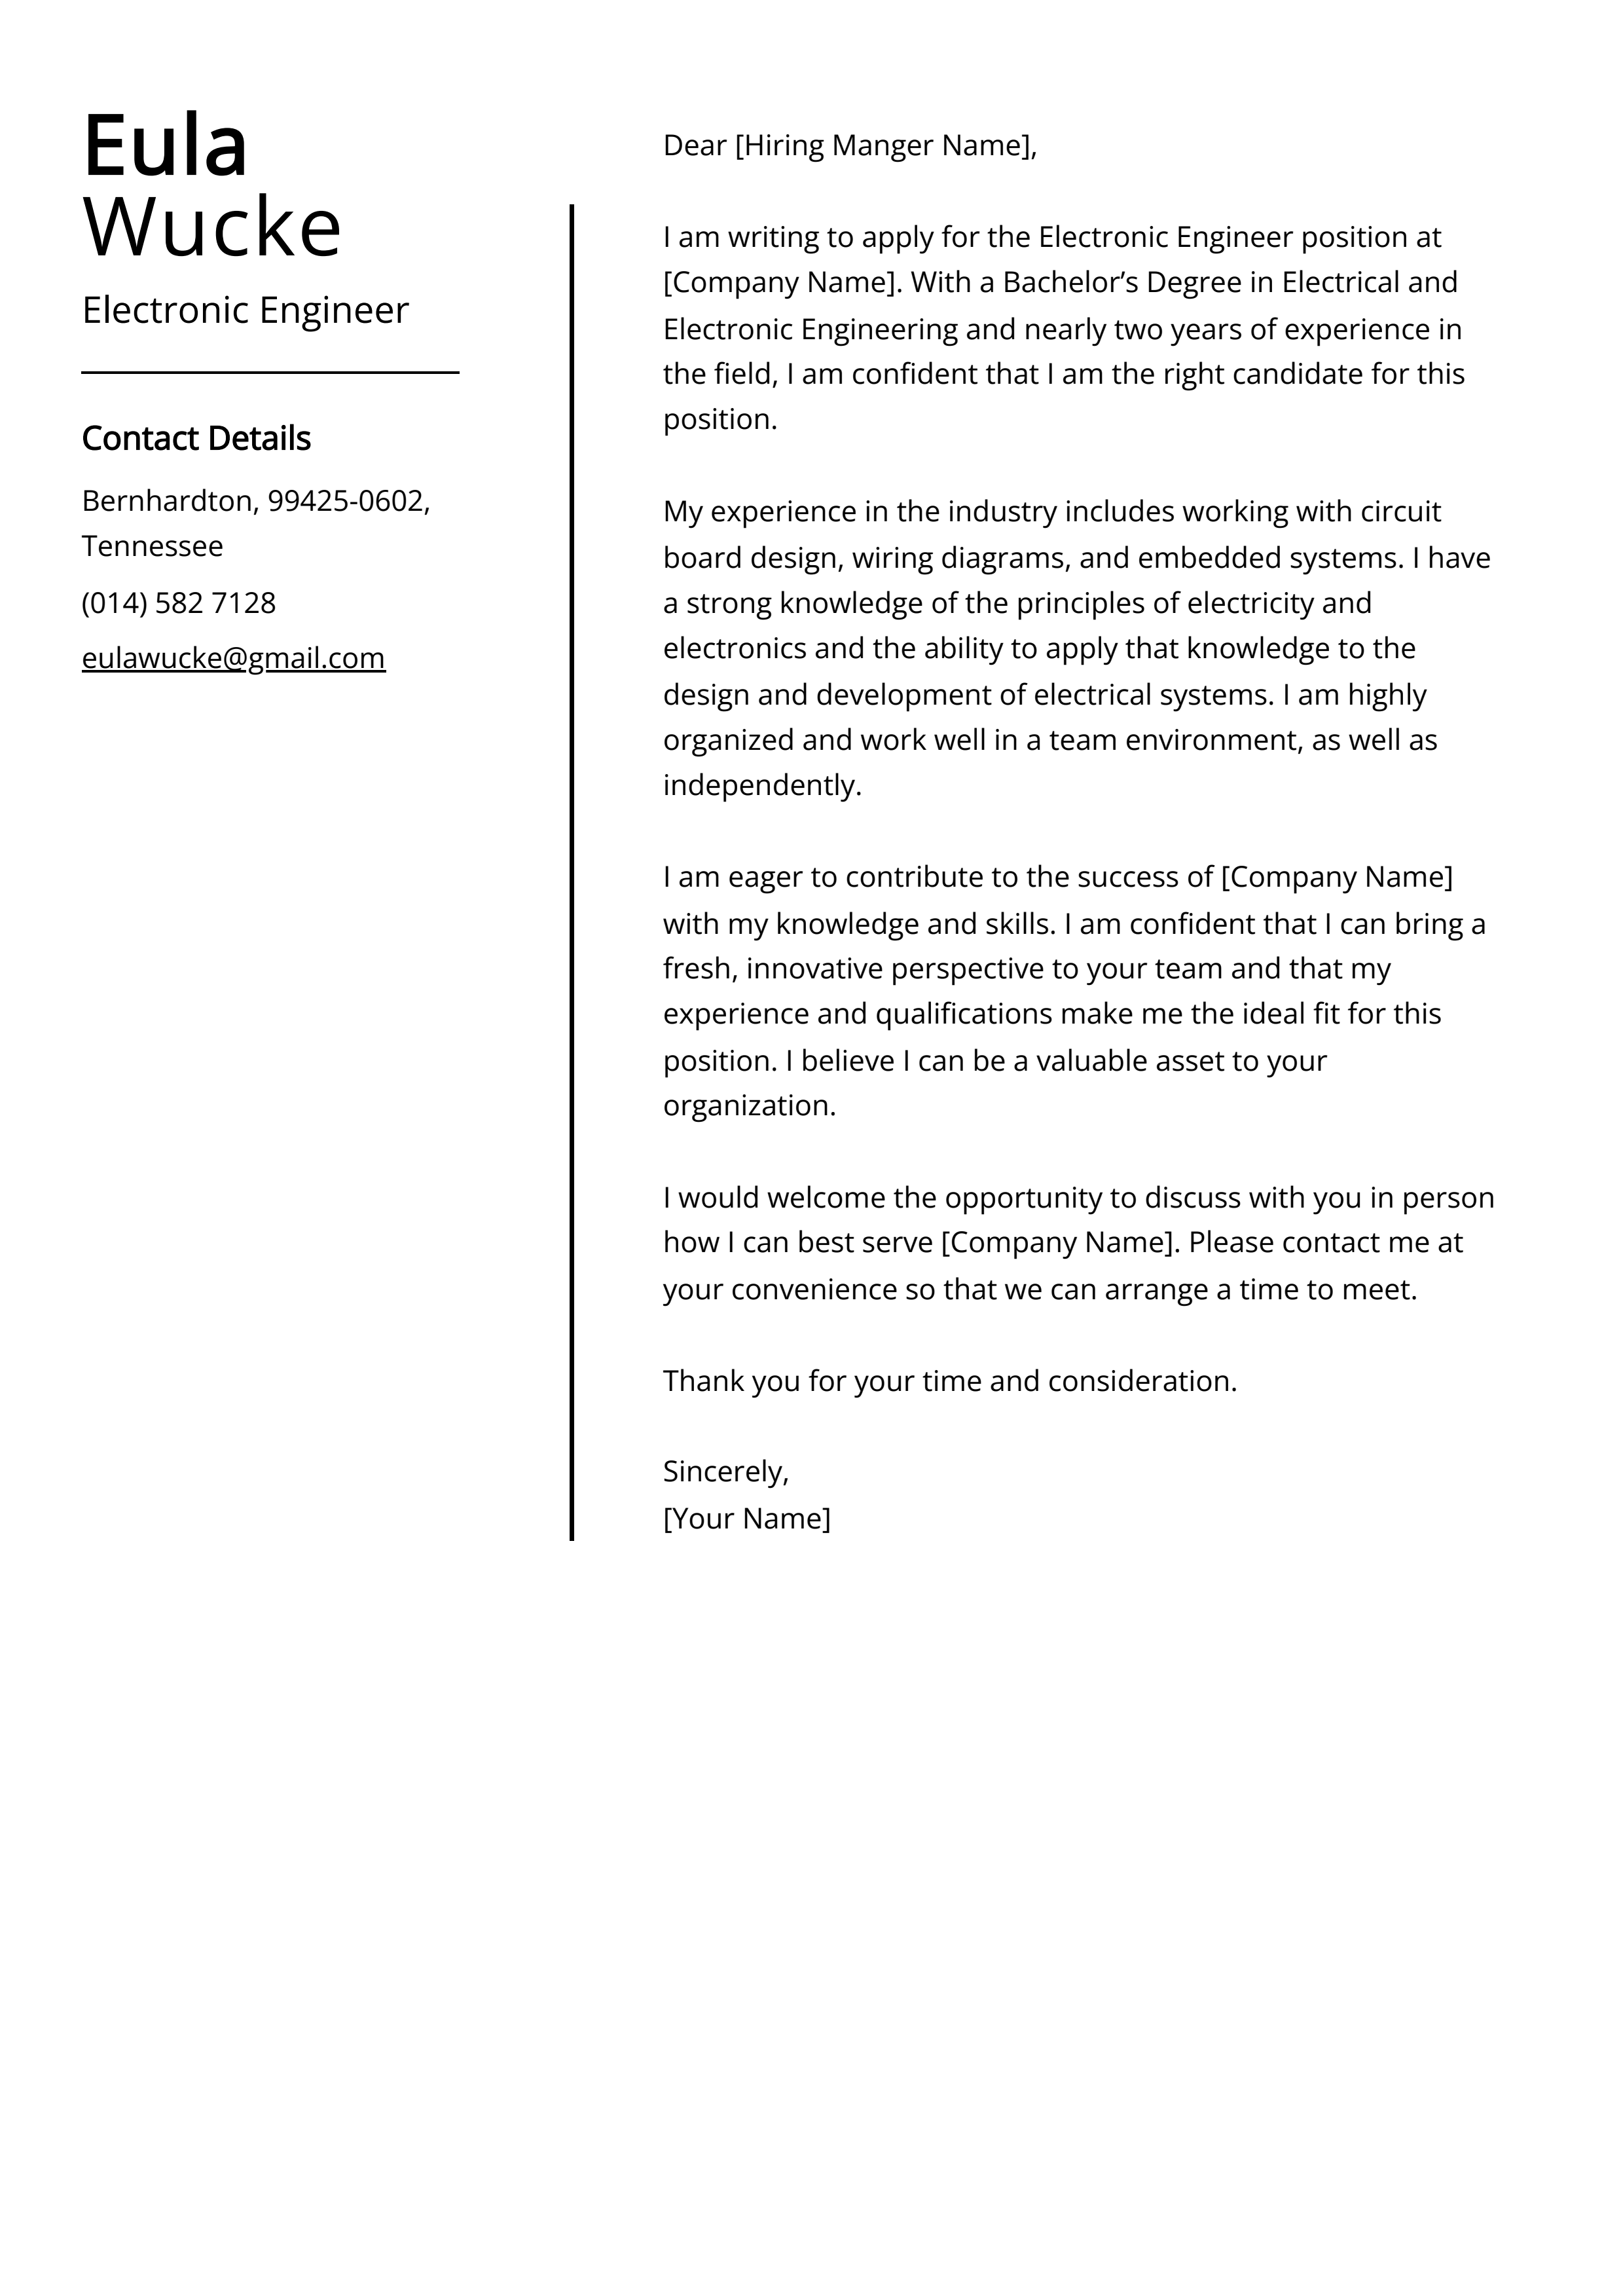 Electronic Engineer Cover Letter Example